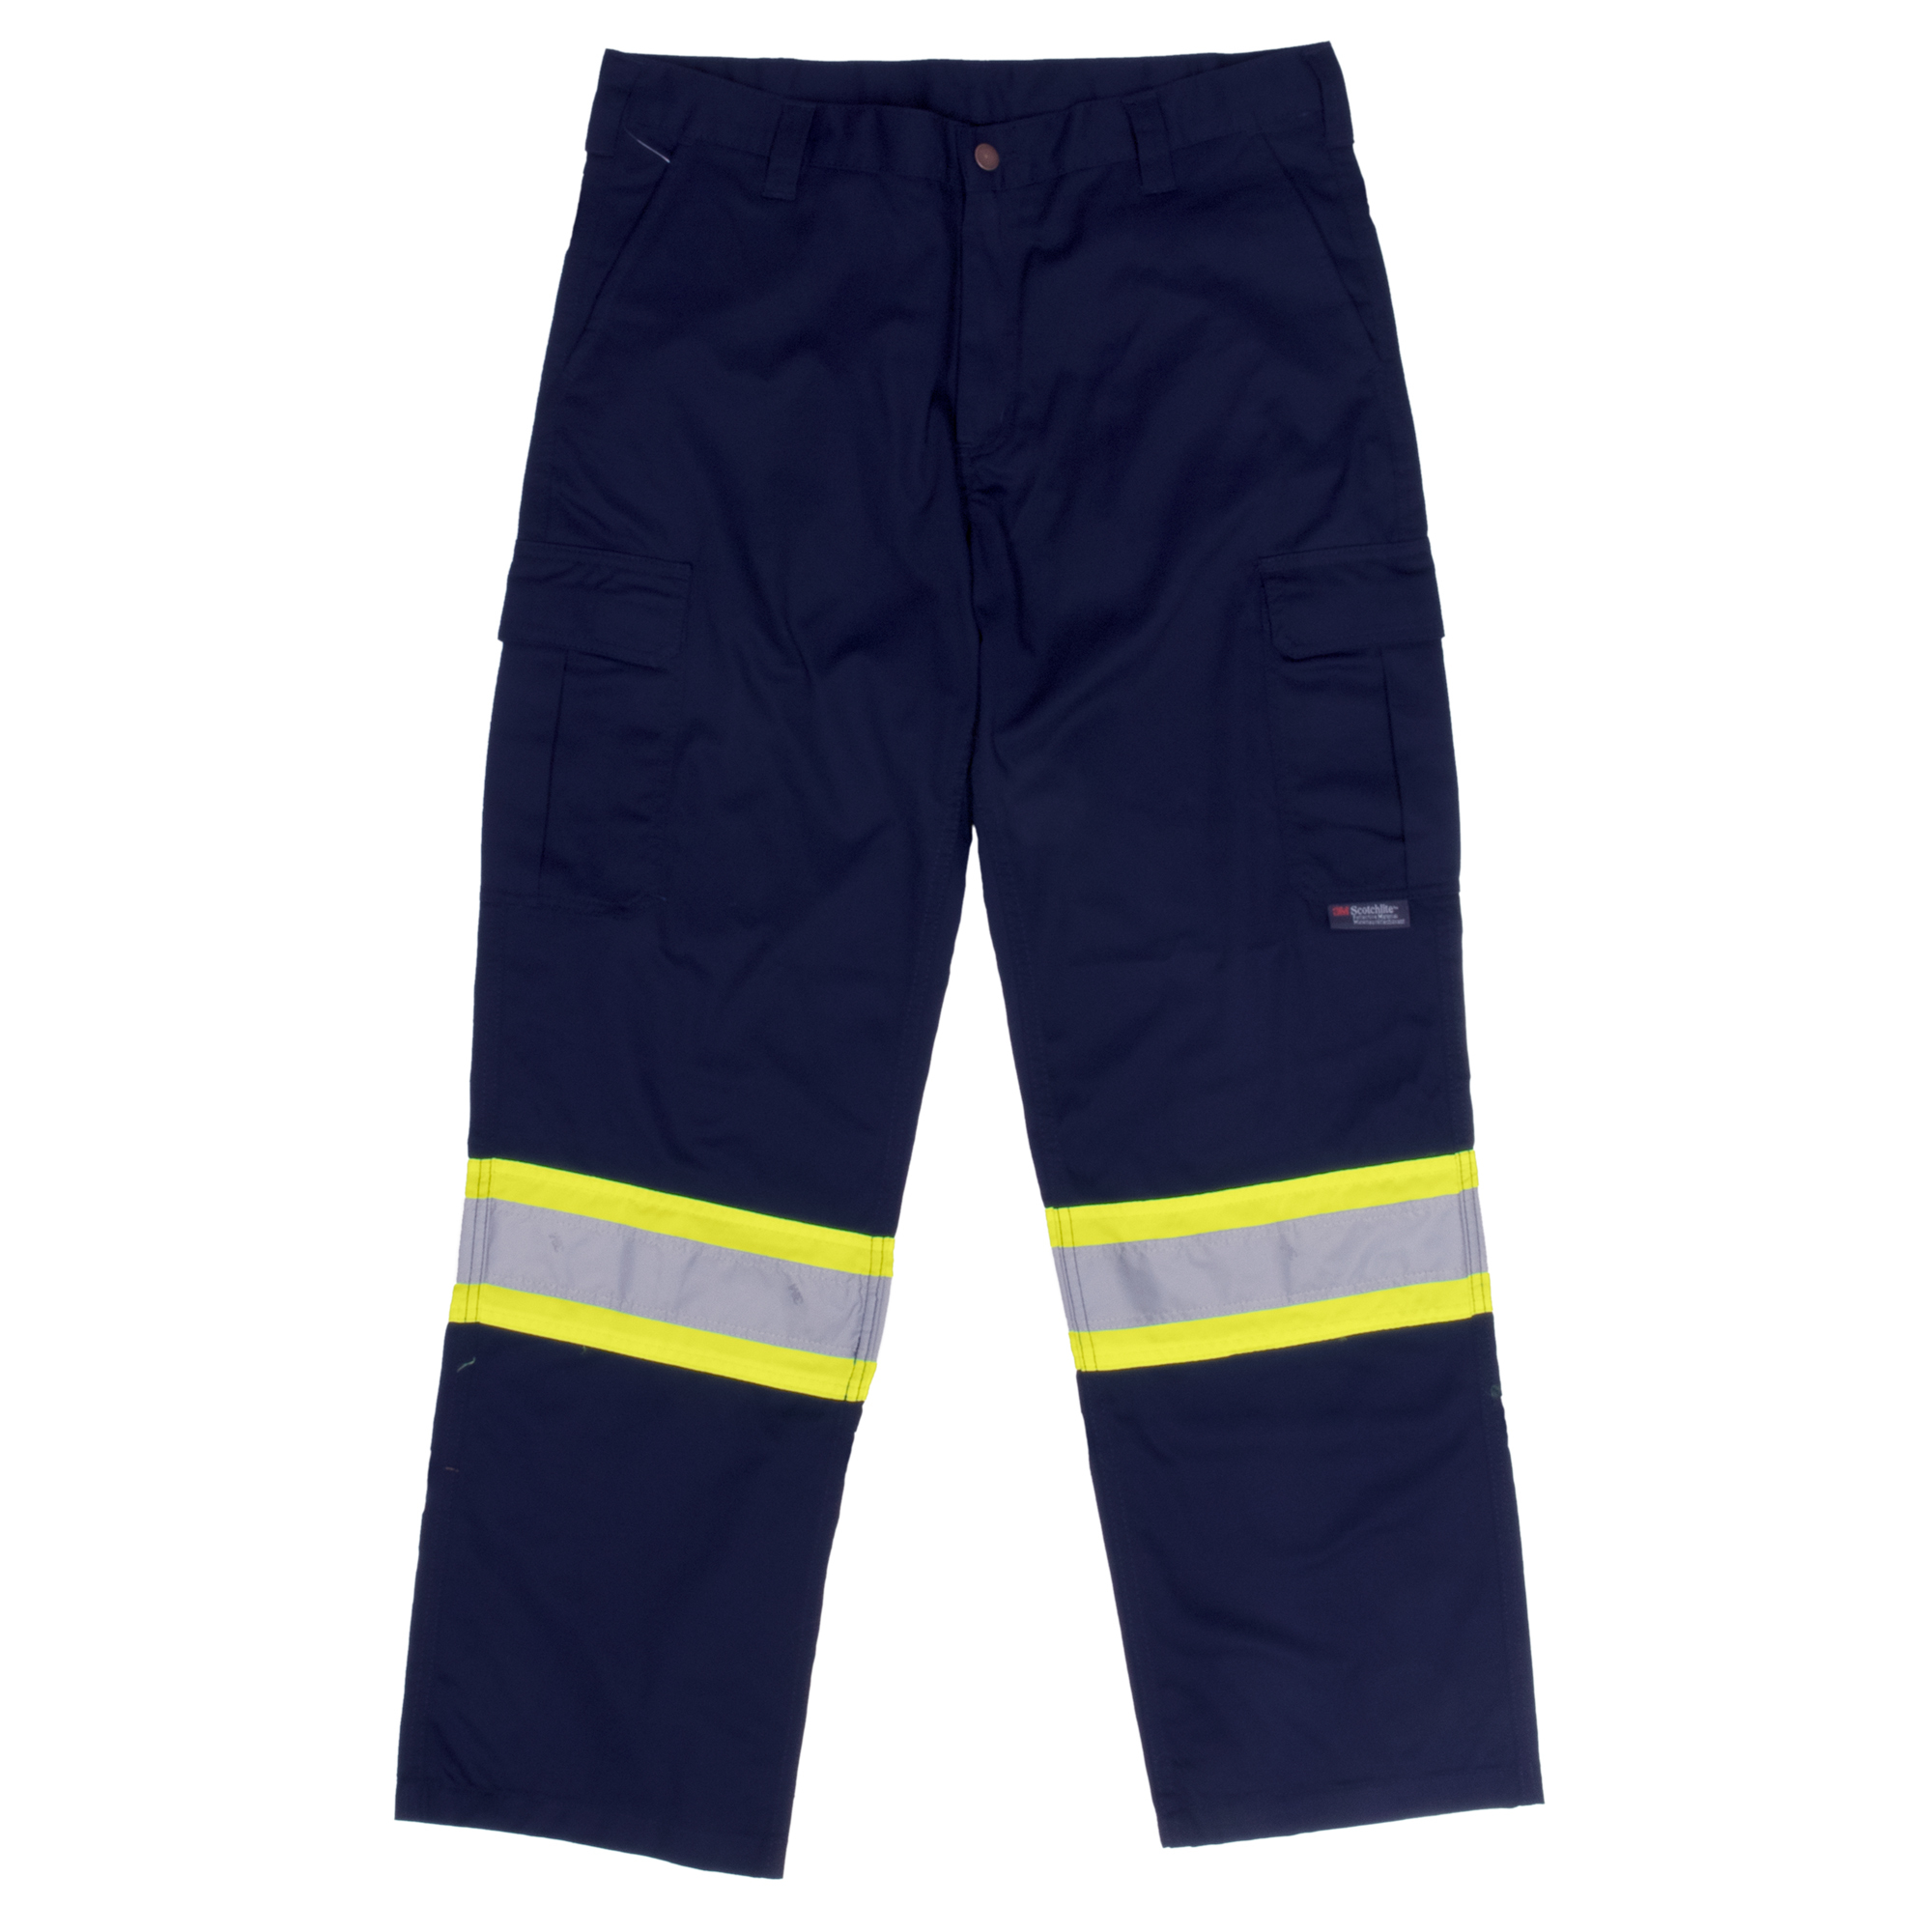 Tough Duck, Safety Cargo Utility Pant, Waist 36 in, Inseam 30 in, Color Navy, Model S60701